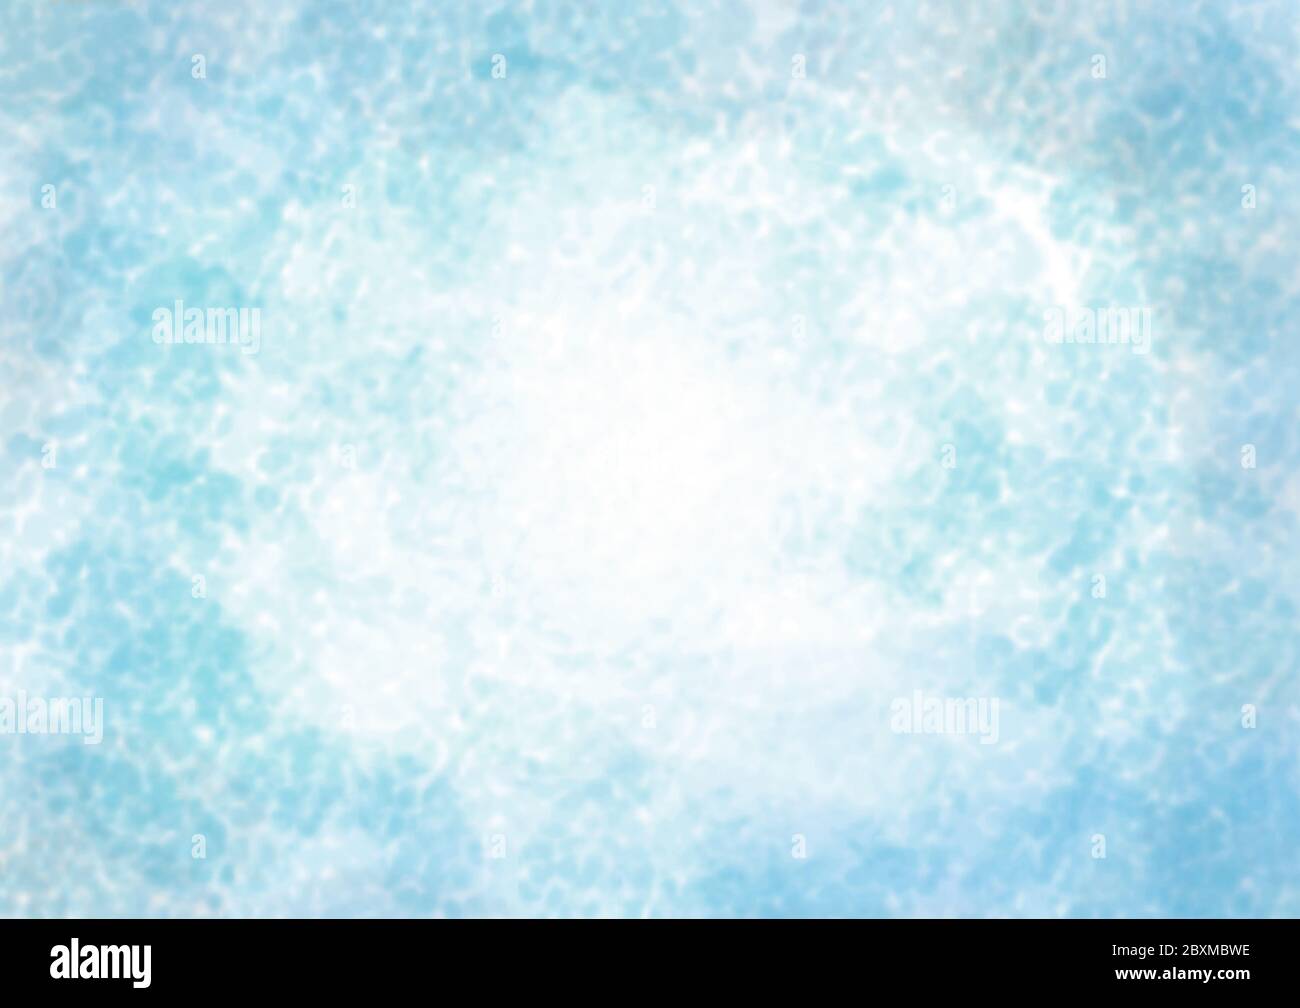 Abstract blues scattered clouds background with bright spot in center for wallpaper or design work Stock Photo